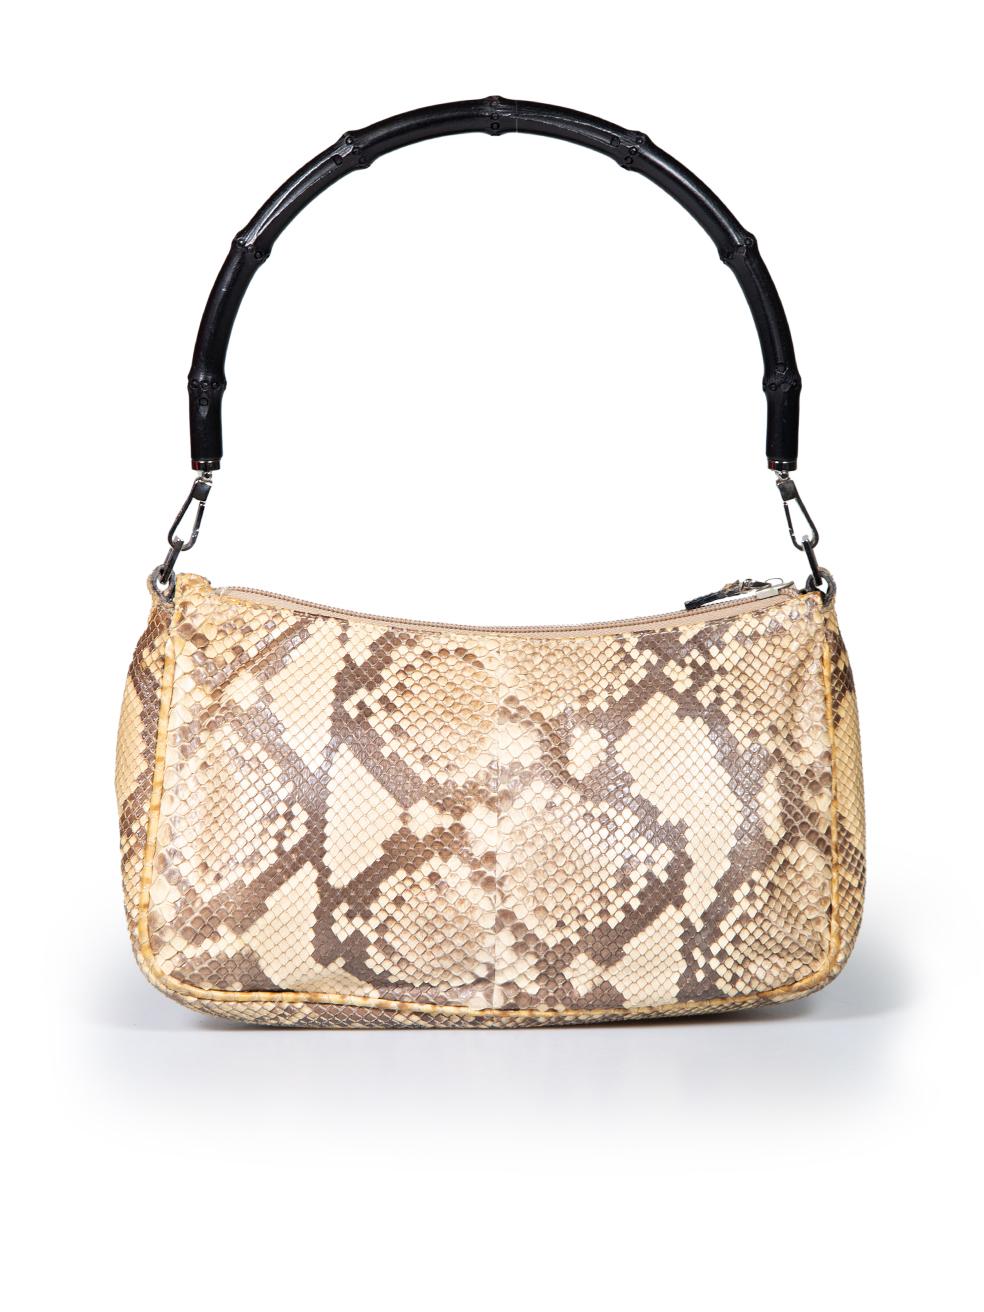 Gucci Beige Python Bamboo Handle Shoulder Bag In Good Condition For Sale In London, GB